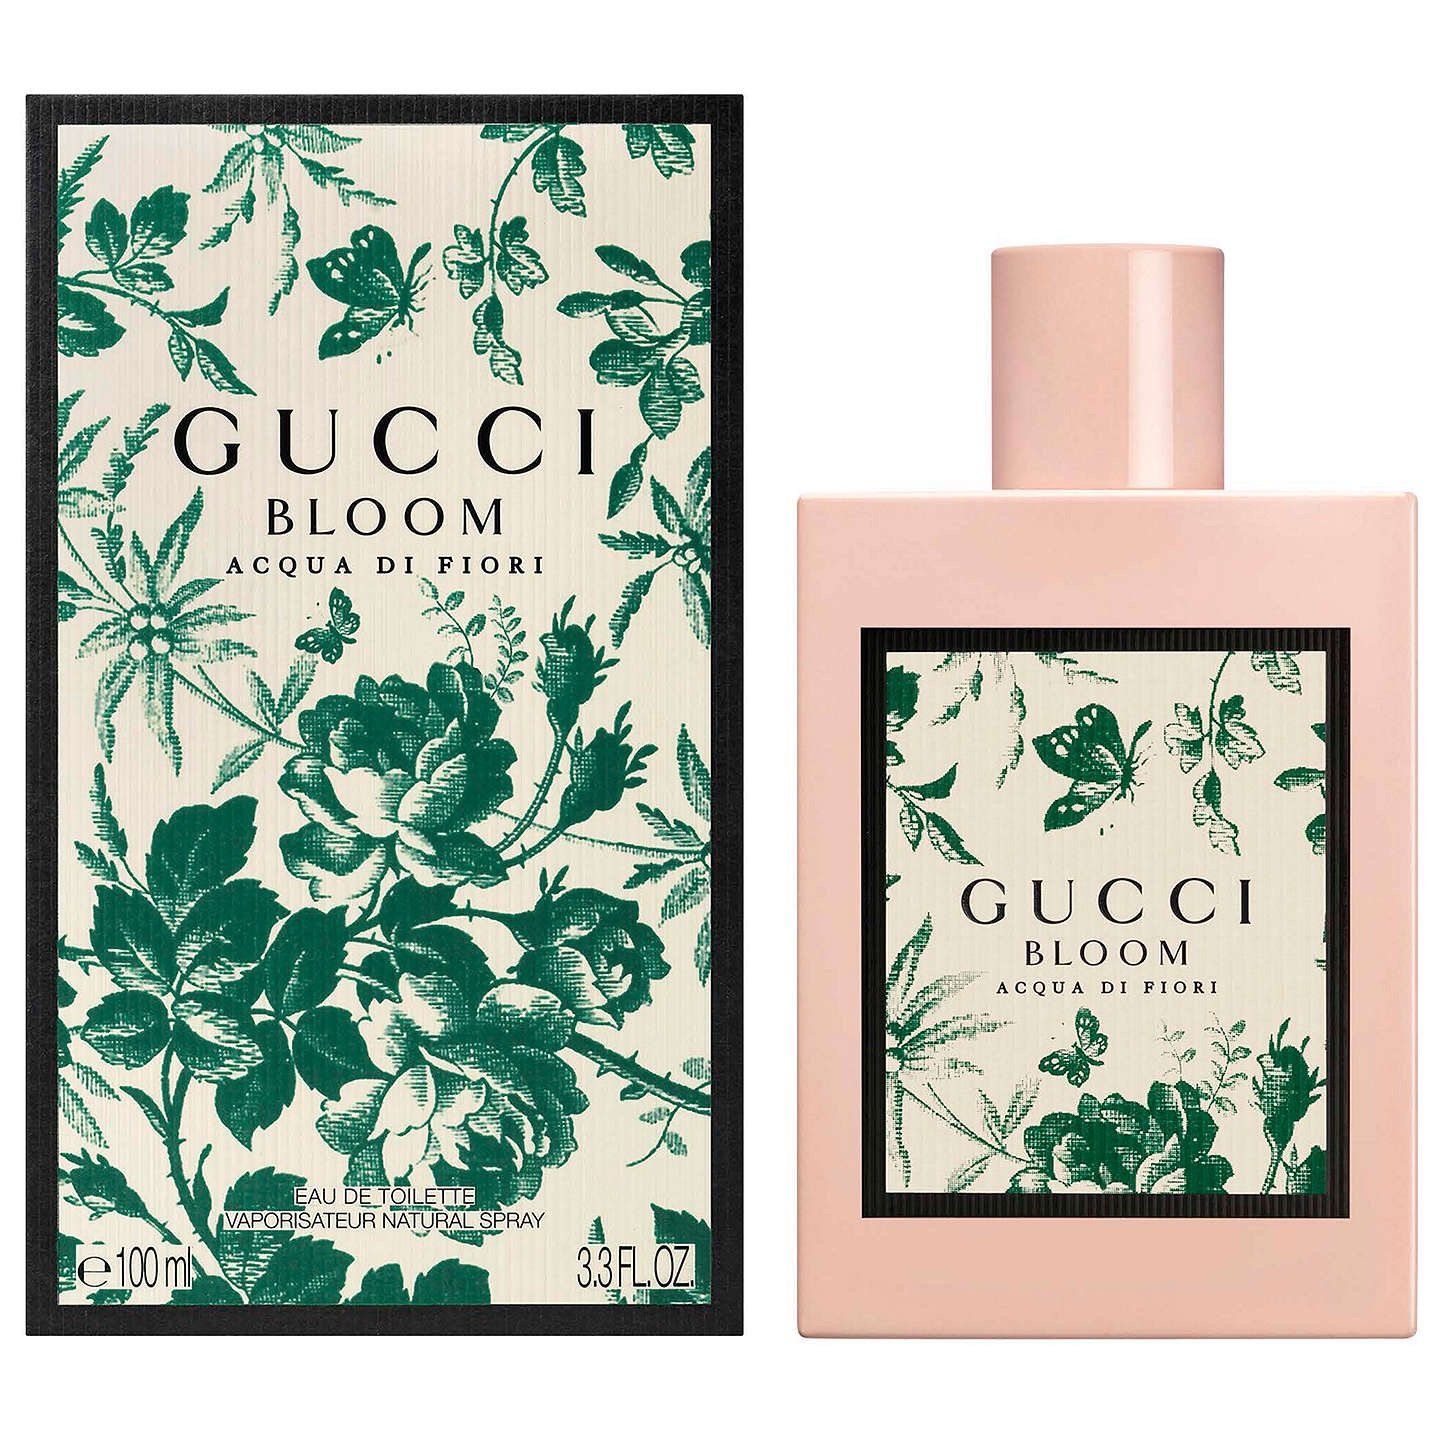 Acqua Di Fiori introduces a new chapter to the world of Gucci Bloom. The addition of green galbanum and dainty cassis buds bring the soft dewy freshness of the early petal and a light, aquatic composition to the signature scent, designed to celebrate the authenticity, vitality and joyful energy of women. Blended by master perfumer Alberto Morillas under the direction of the House‰۪s creative director, Gucci Bloom is created to unfold like its name, capturing the rich scent of a thriving garden filled with an abundance of flowers. Tuberose and jasmine combine with rangoon creeper‰ÛÓa unique flower discovered in South India‰ÛÓto create a rich fragrance that transports the wearer to an imaginary garden. The scent is presented in a lacquered bottle, reminiscent of porcelain, in a vintage powder pink shade with a green Herbarium print Gucci label appliqu̩.<br><br>Style: Floral, green.<br><br>Notes:<br><br>- Top: green galbanum, cassis buds.<br><br>- Middle: jasmine buds, rangoon creeper, tuberose.<br><br>- Base: musk, sandalwood.